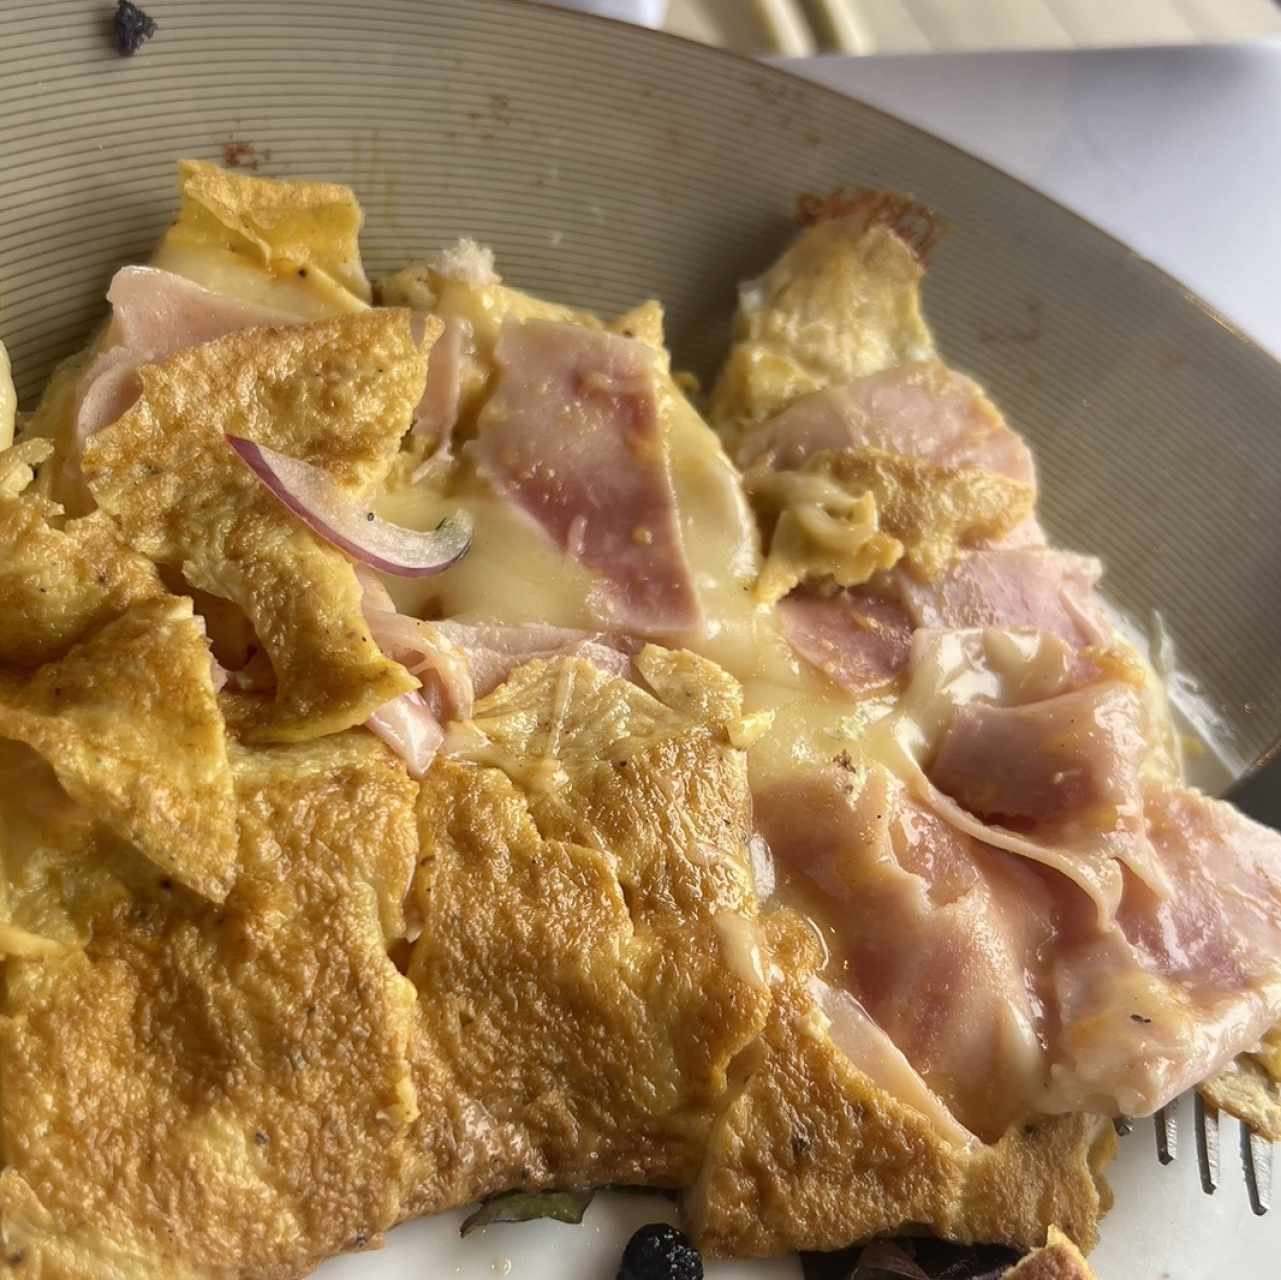 Omelette jamón y queso